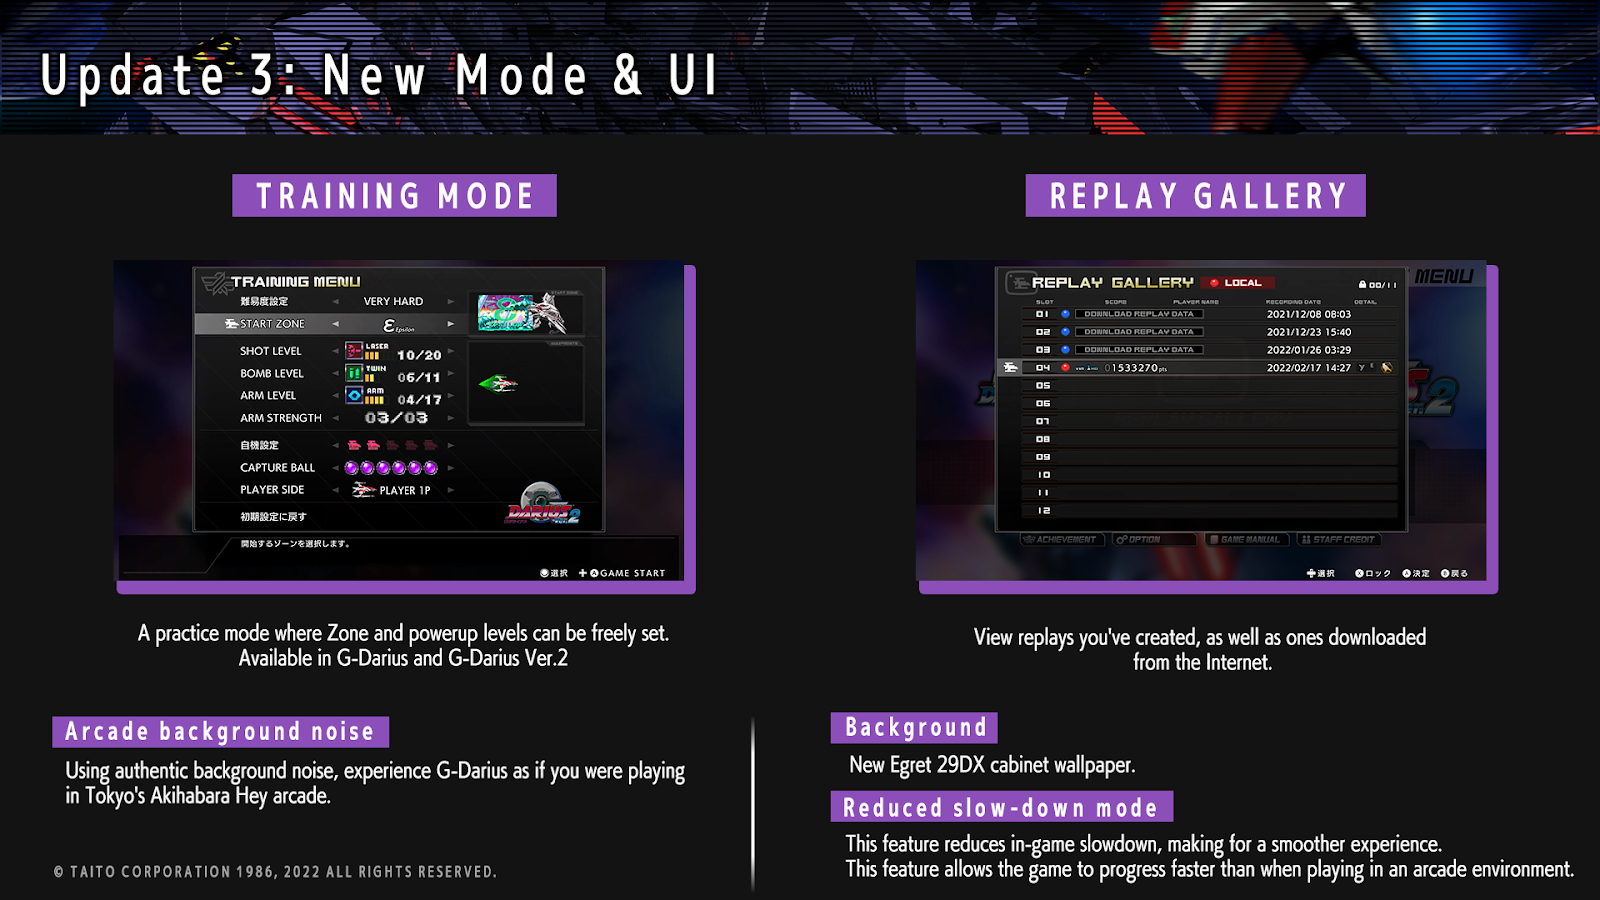 Screenshot showing new modes and UI